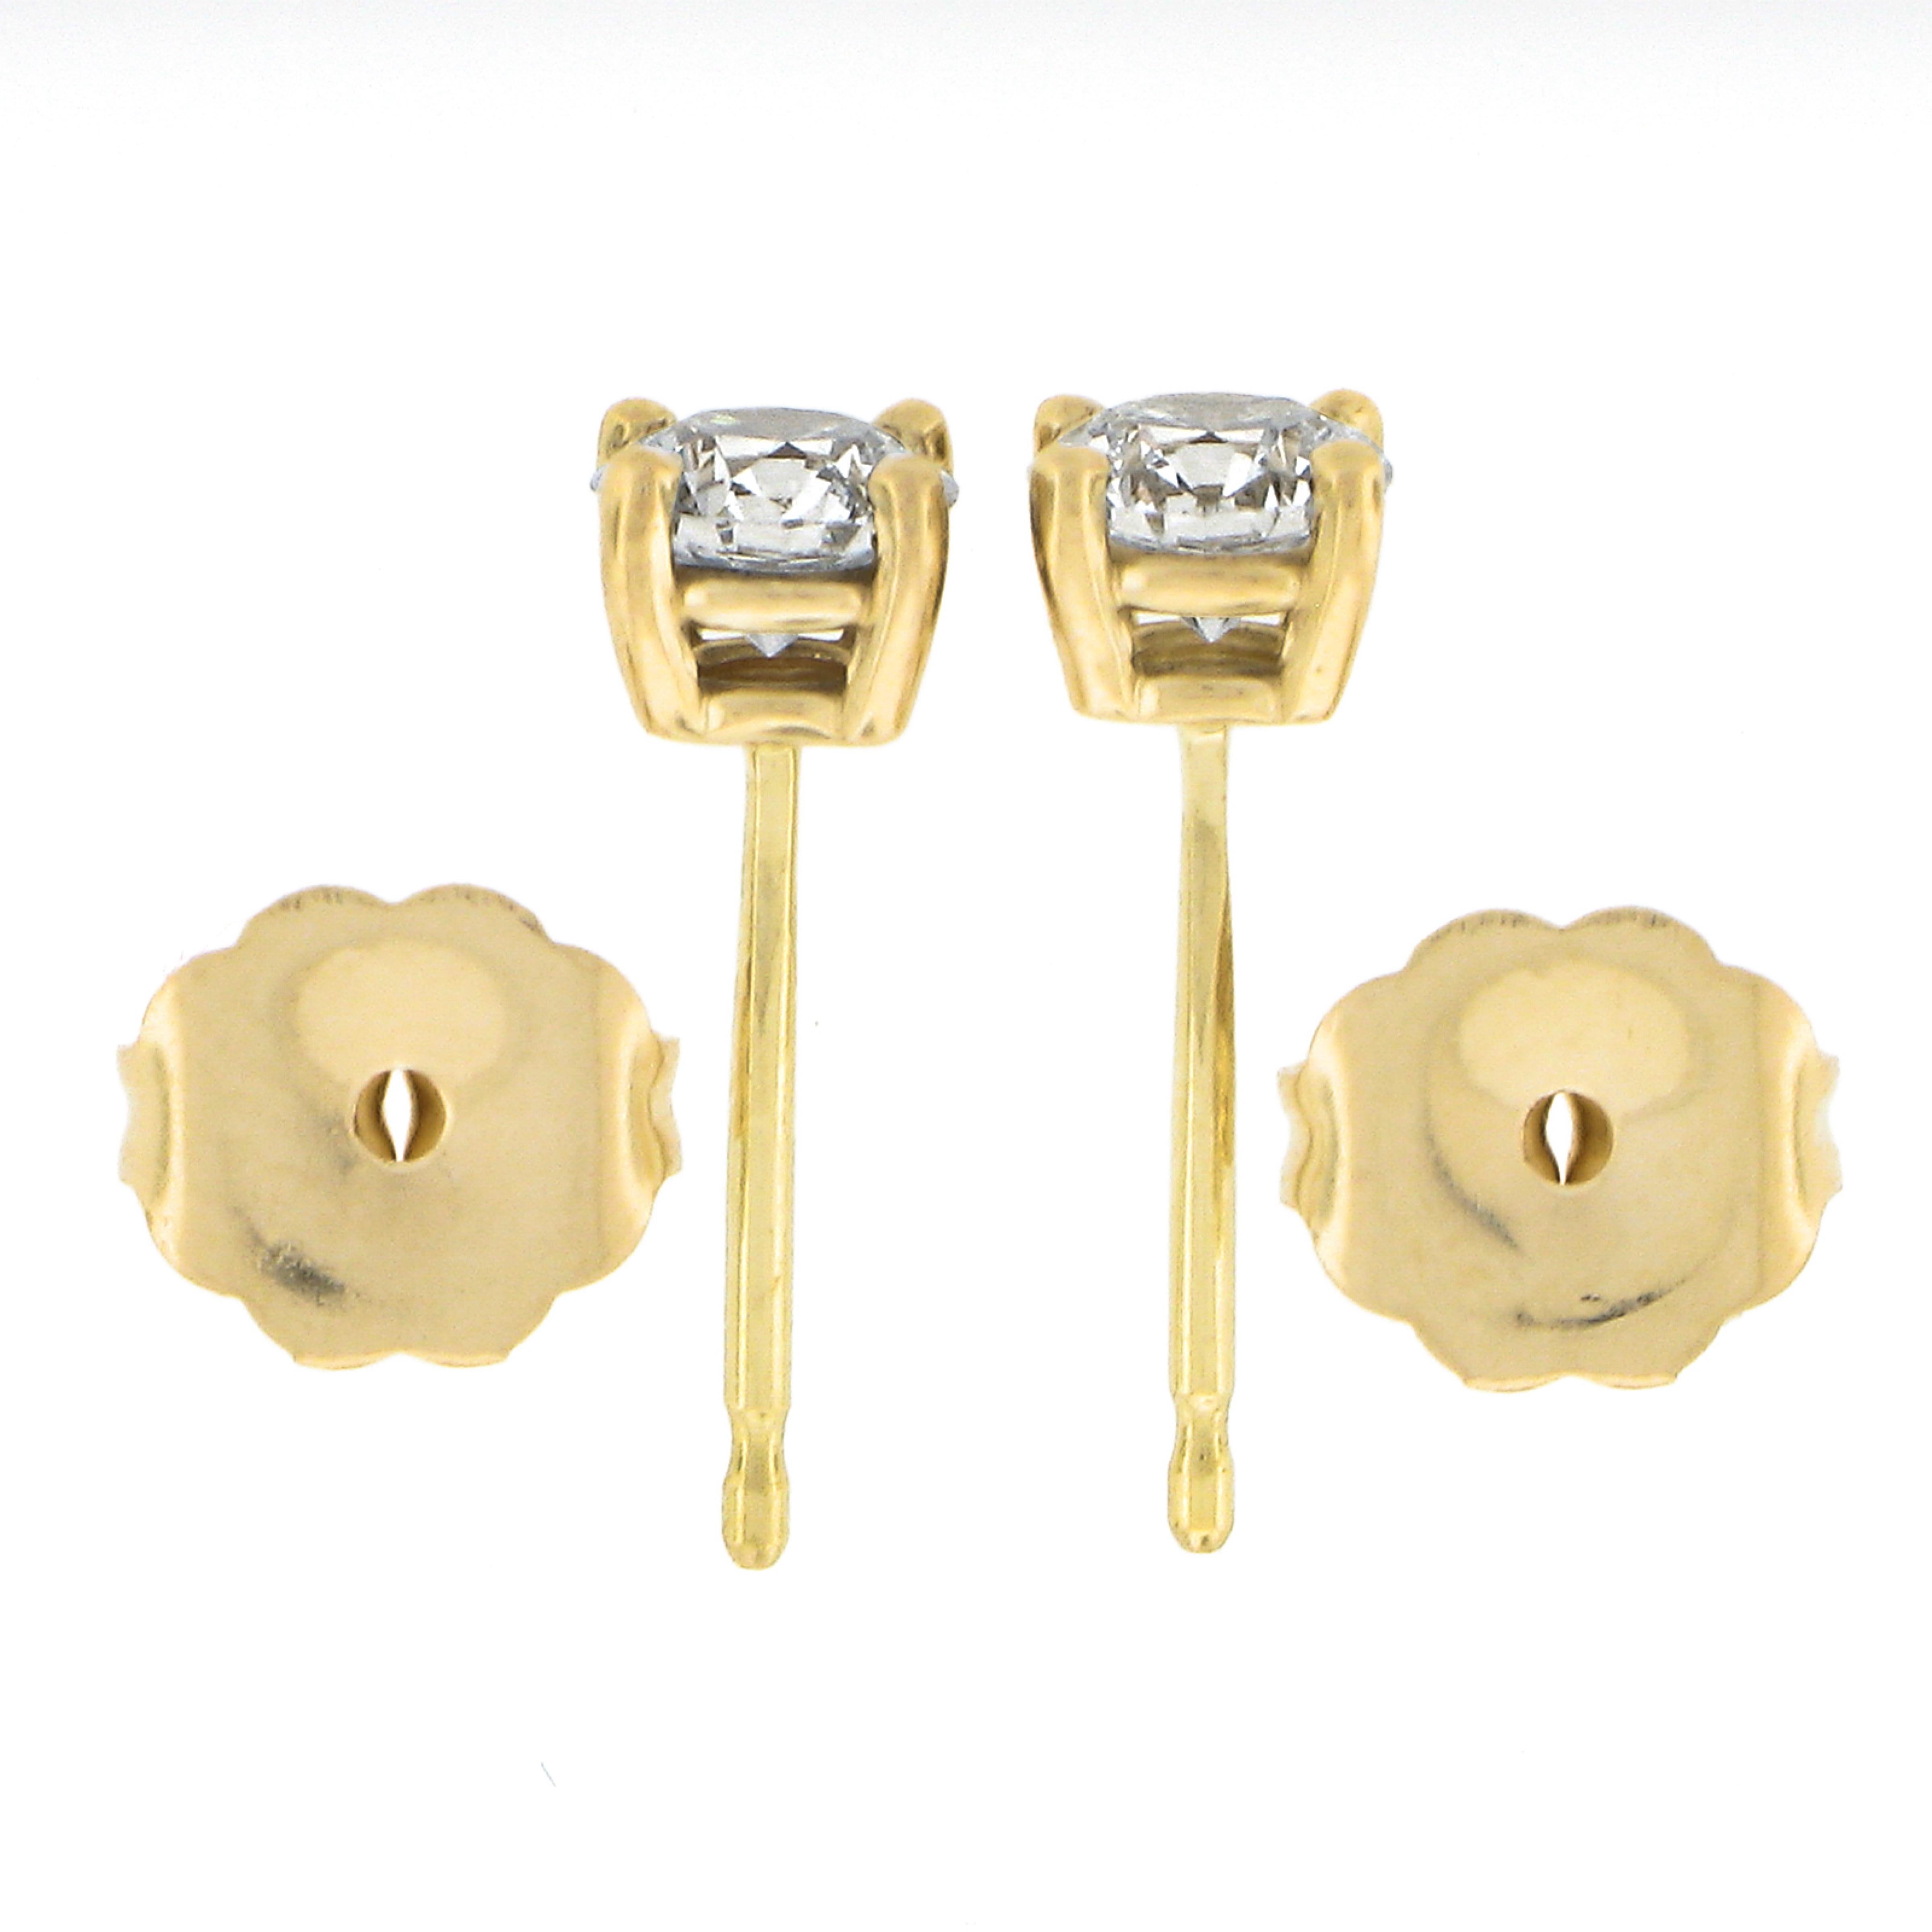 NEW Classic 14k Yellow Gold 0.50ct Round Ideal Cut Diamond 4-Prong Stud Earrings en vente 1